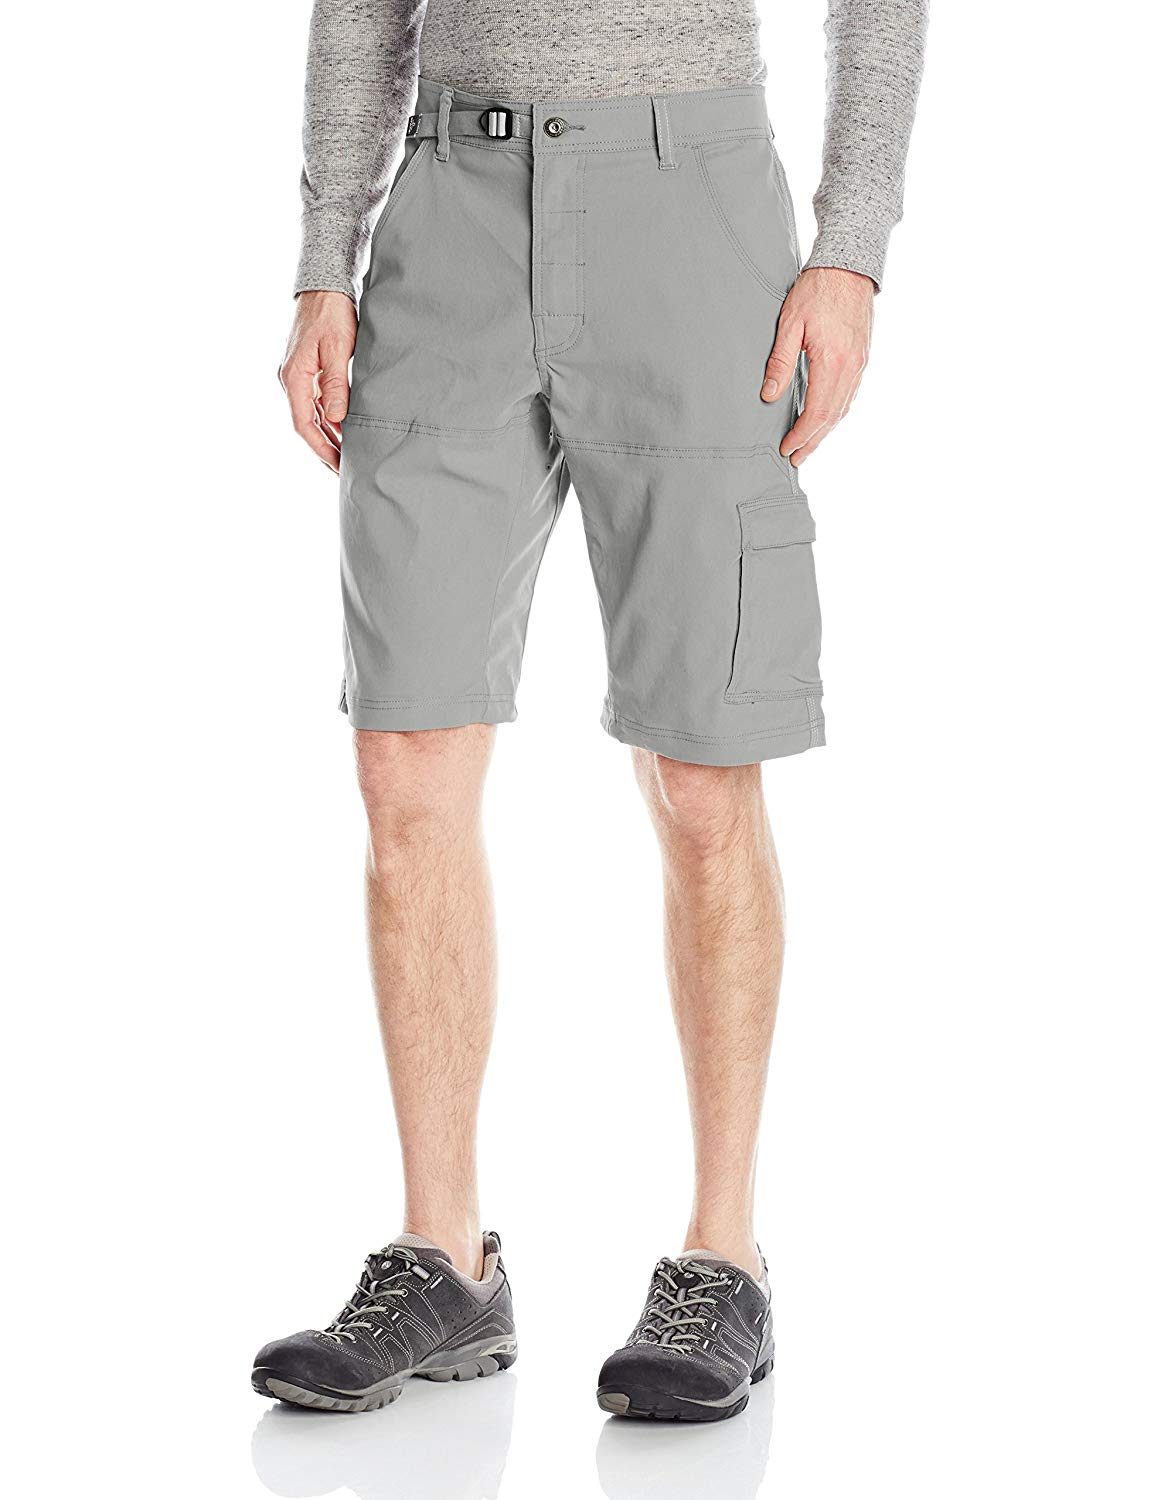 10 Best Hiking Shorts Reviewed in 2022 | TheGearHunt